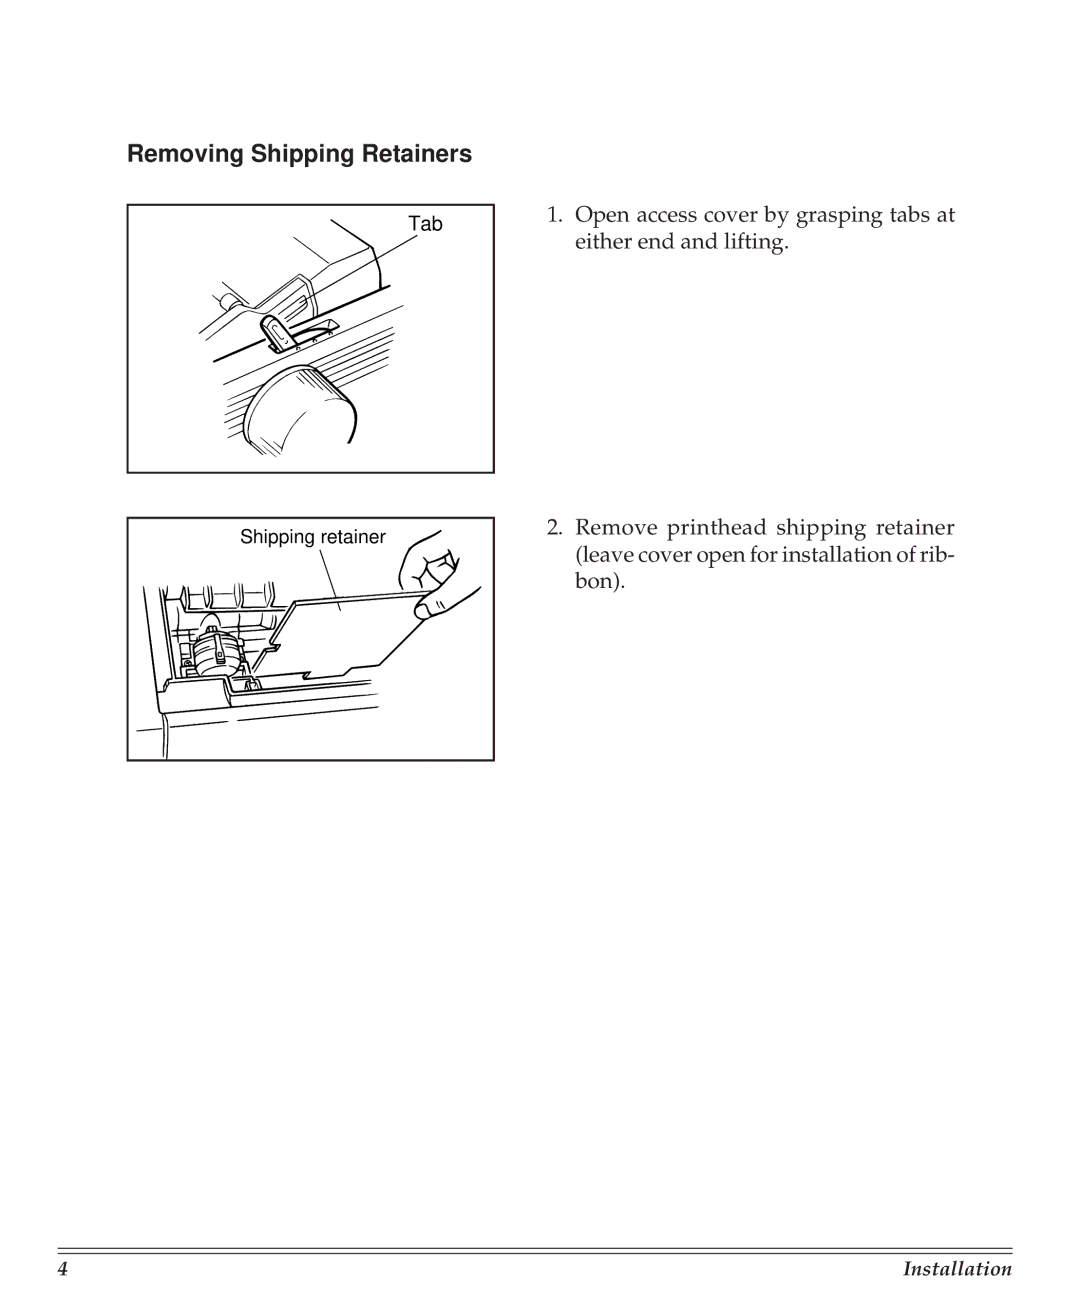 Turbo Chef Technologies 390/391 manual Removing Shipping Retainers 